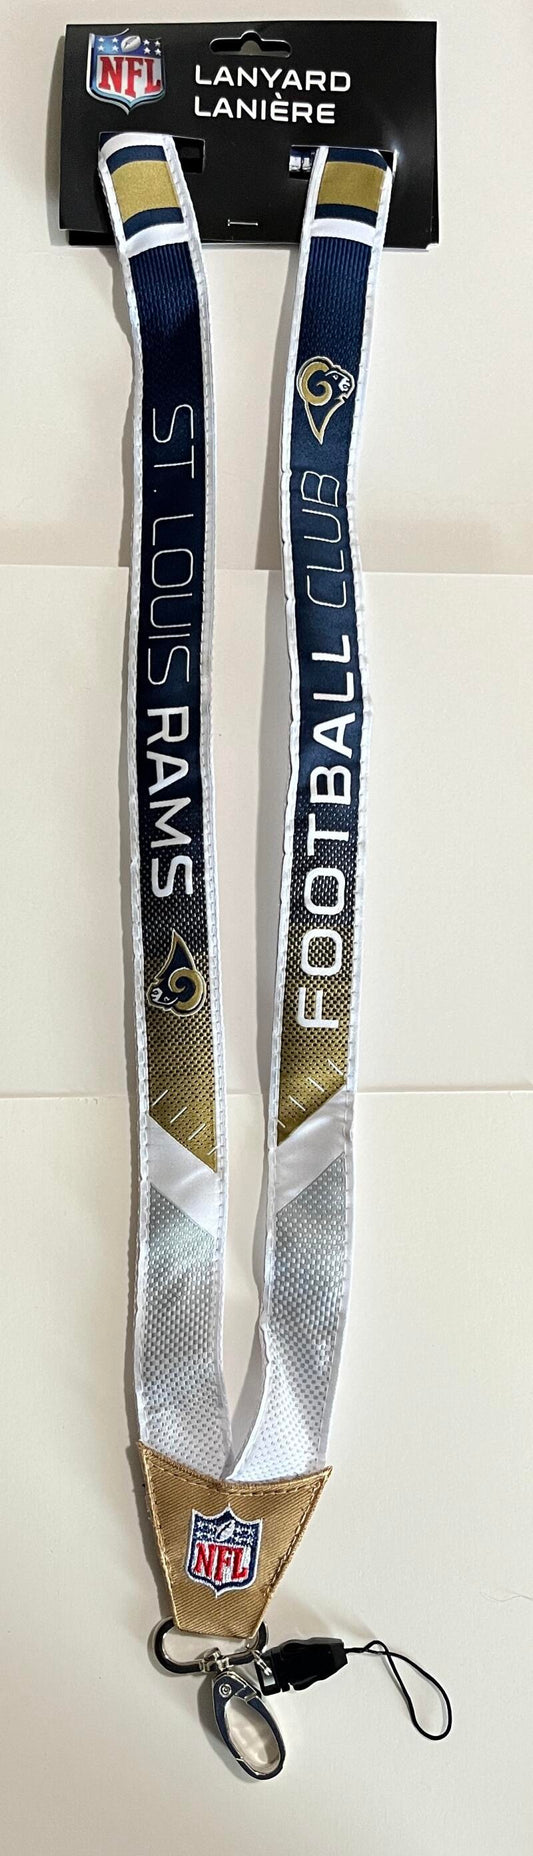 St. Louis Rams Woven Licensed NFL Football Lanyard Metal Clasp Image 1